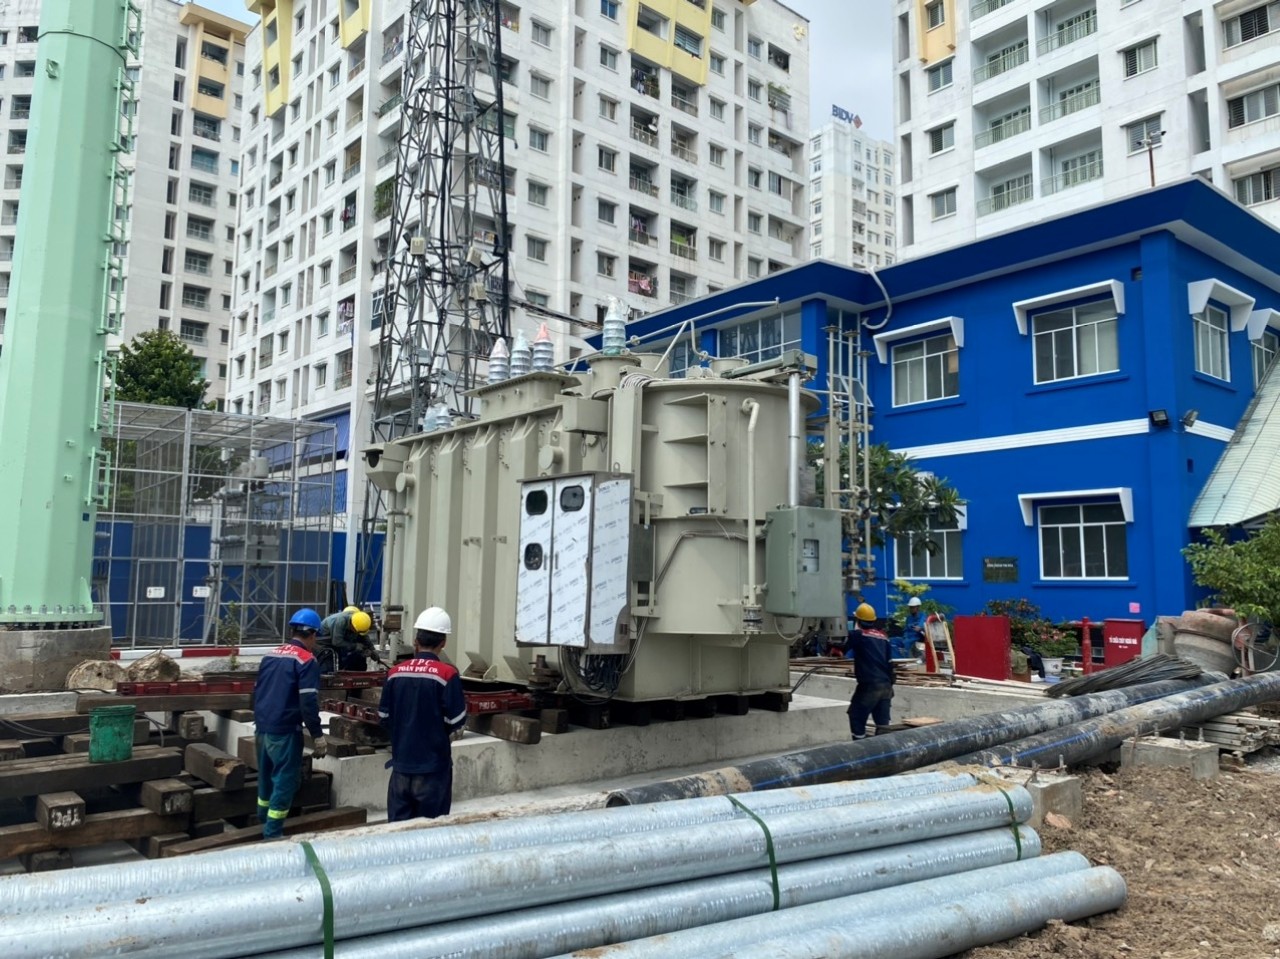 Installing the 3rd transformer at 110kV station of the Racecourse